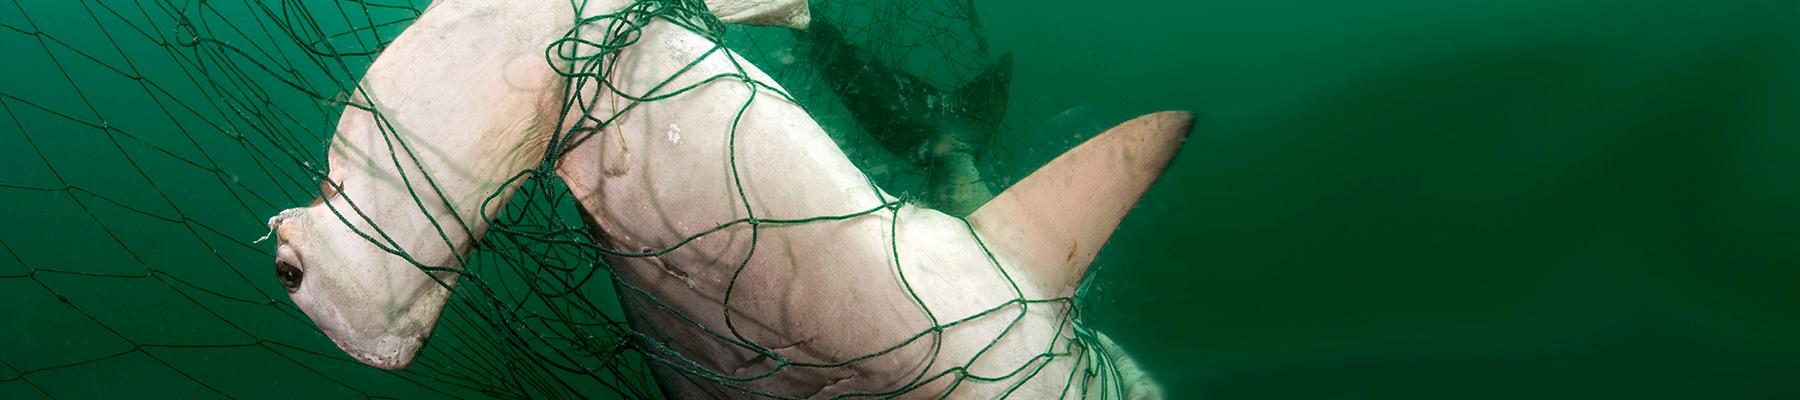 Scalloped Hammerhead shark Sphyrna lewini caught in gill net © Brian J. Skerry / National Geographic Stock / WWF